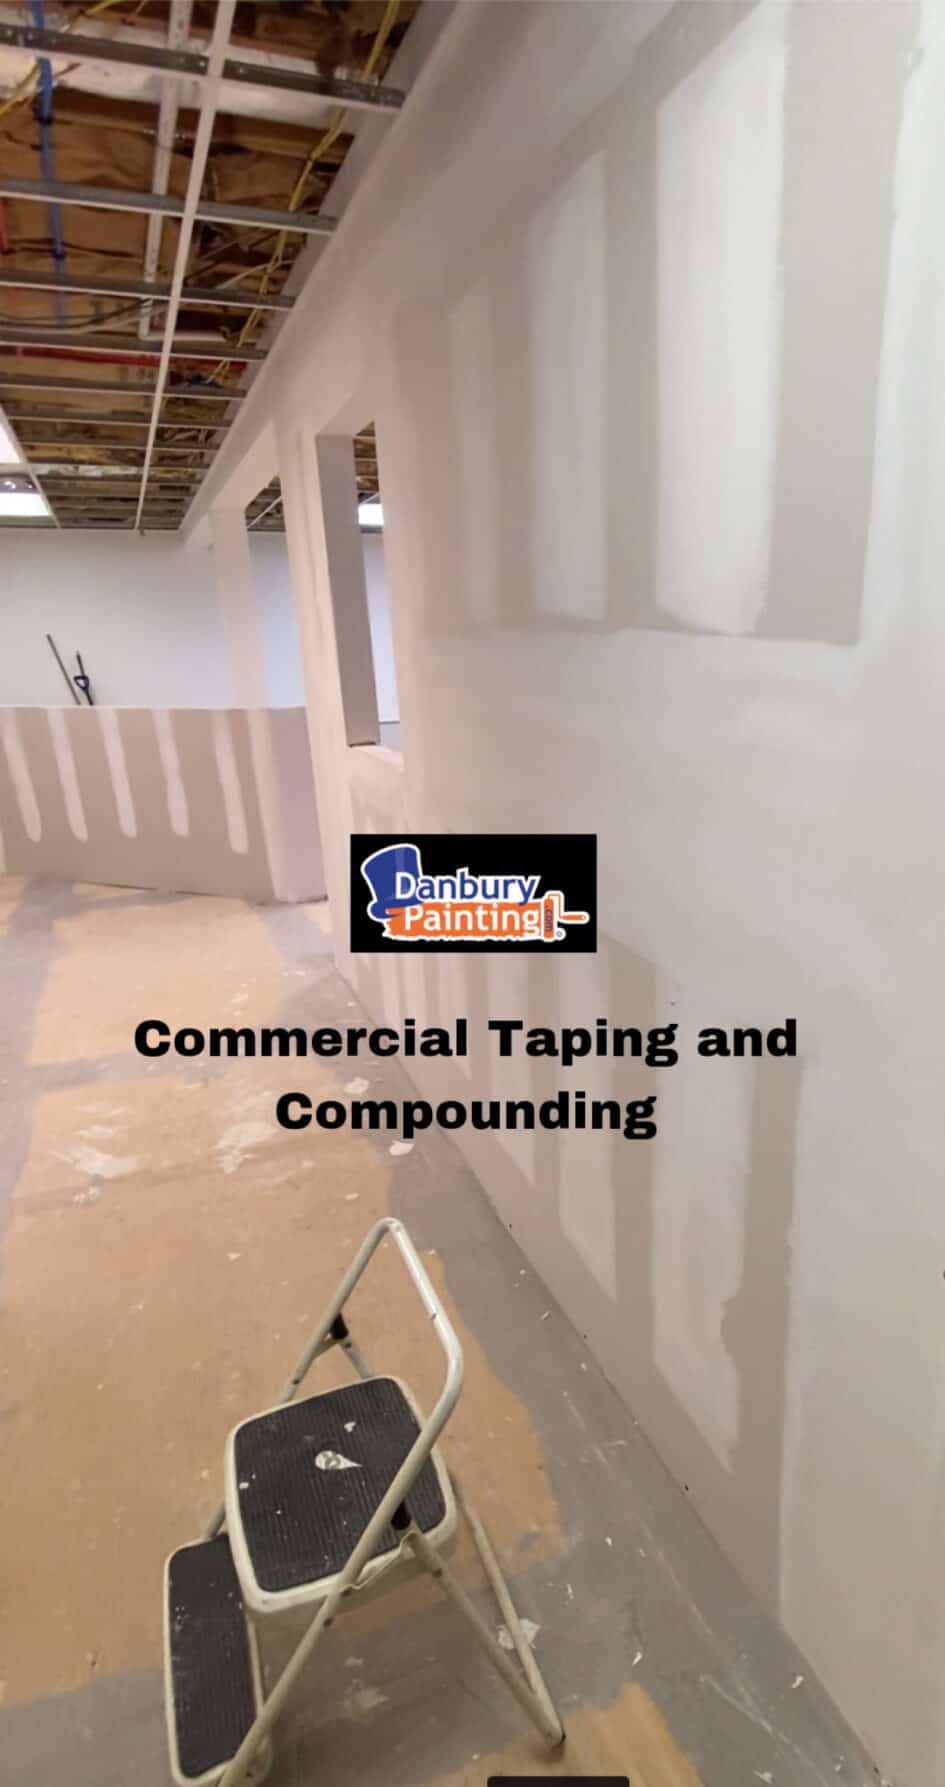 Drywall and Compound service in Danbury, Ct. Brookfield, Ct. Newtown, Ct. Bethel, Ct.